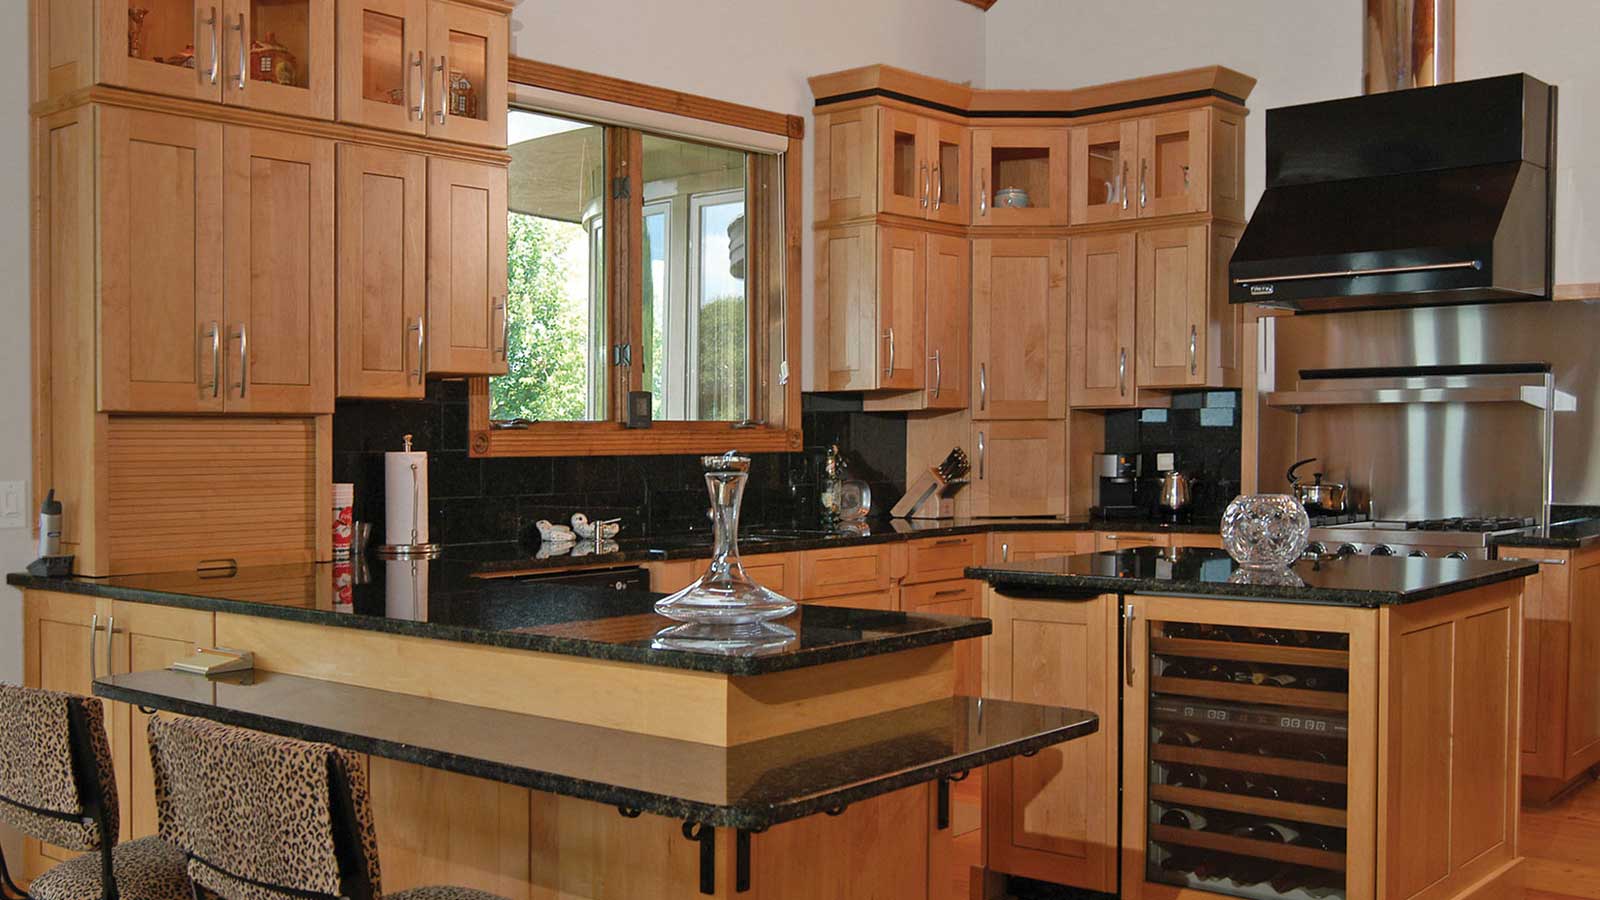 Precision Cabinets, Inc. will design the perfect kitchen cabinets for your mountain home